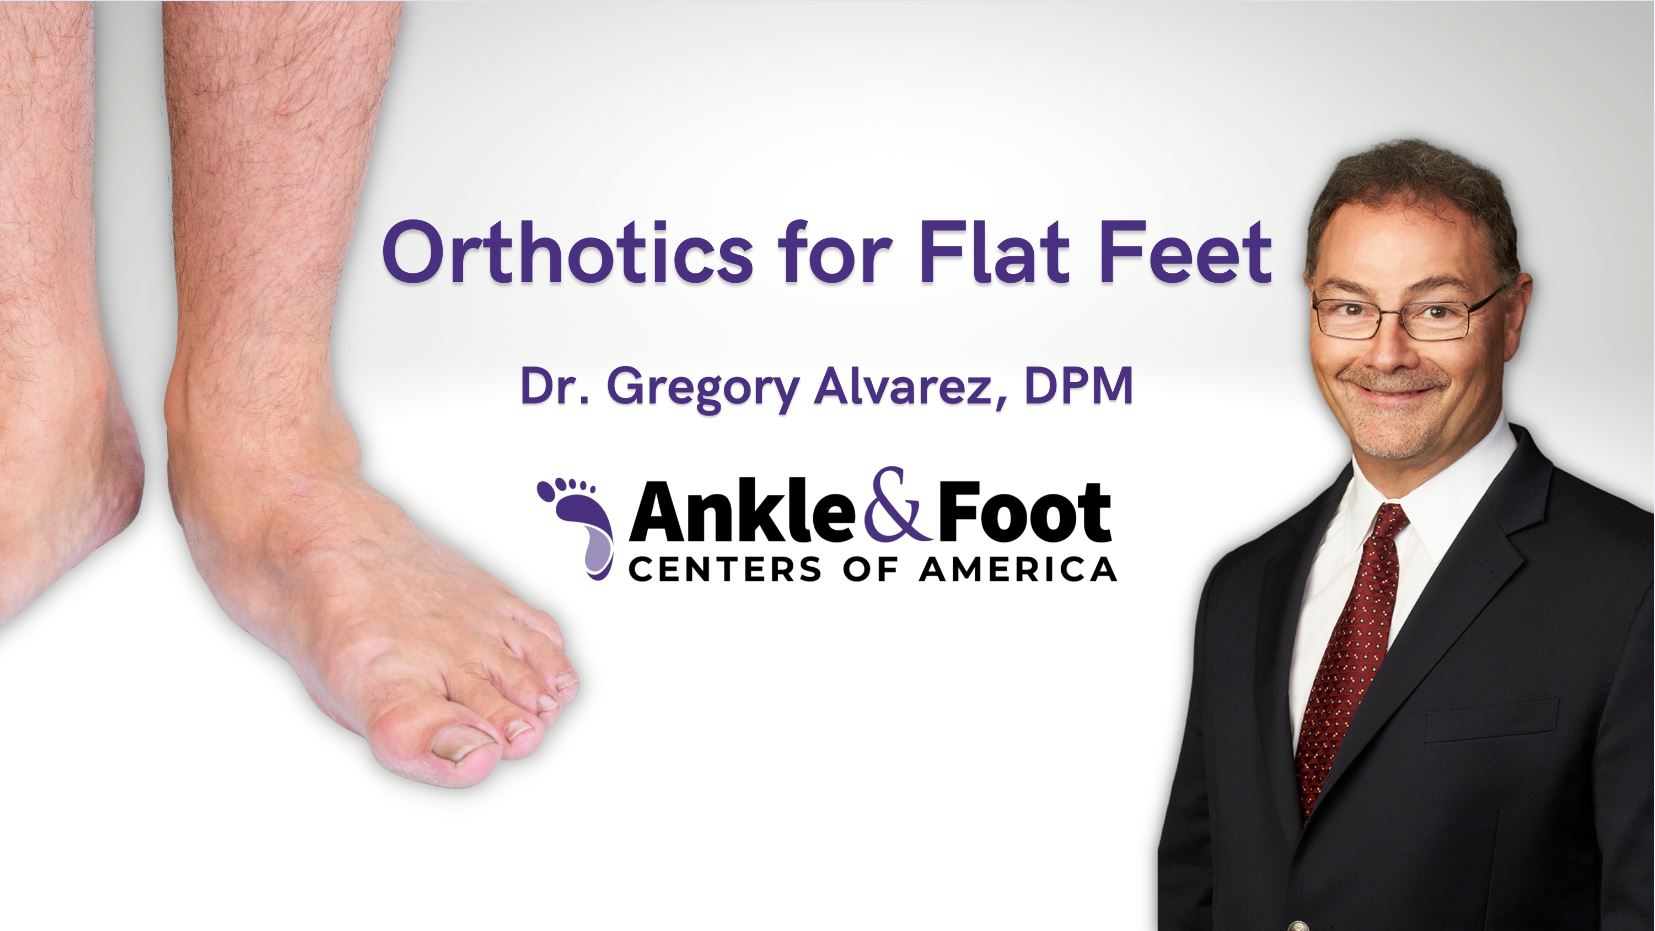 Exercises to Help Heal Your Sprained Ankle - Custom Orthotics Blog